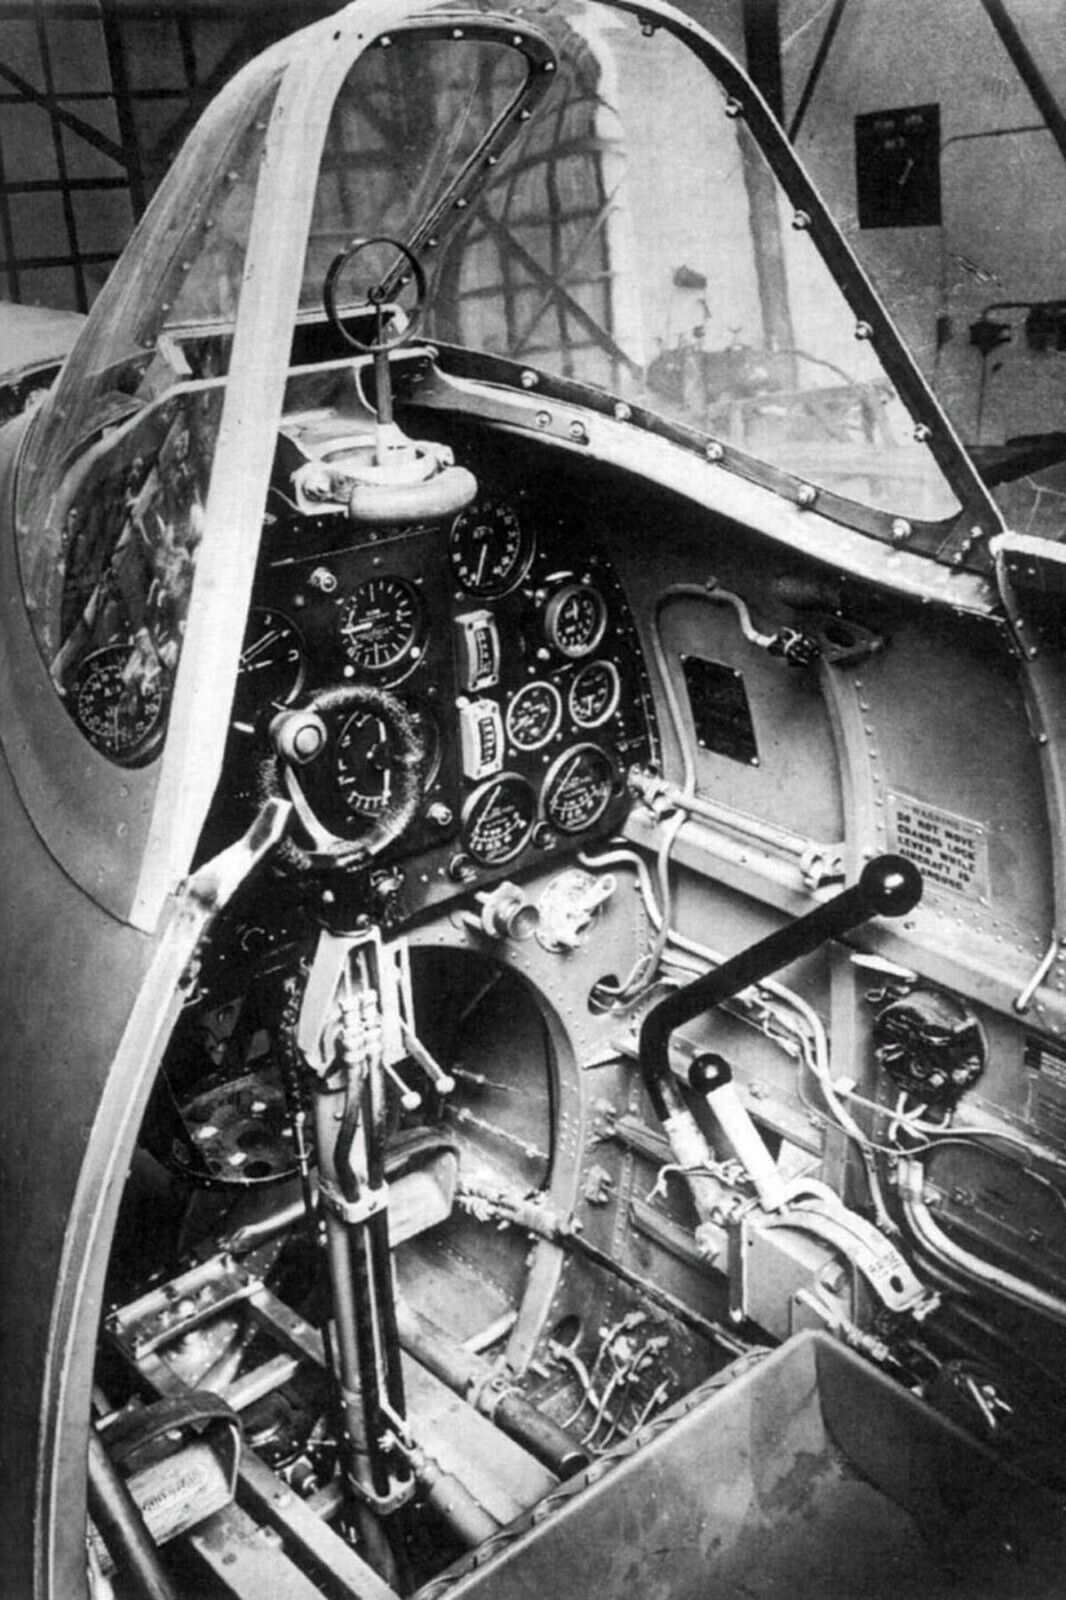 Cockpit of English “Spitfire” Mk.I fighter WW2 Photo Glossy 4*6 in δ006